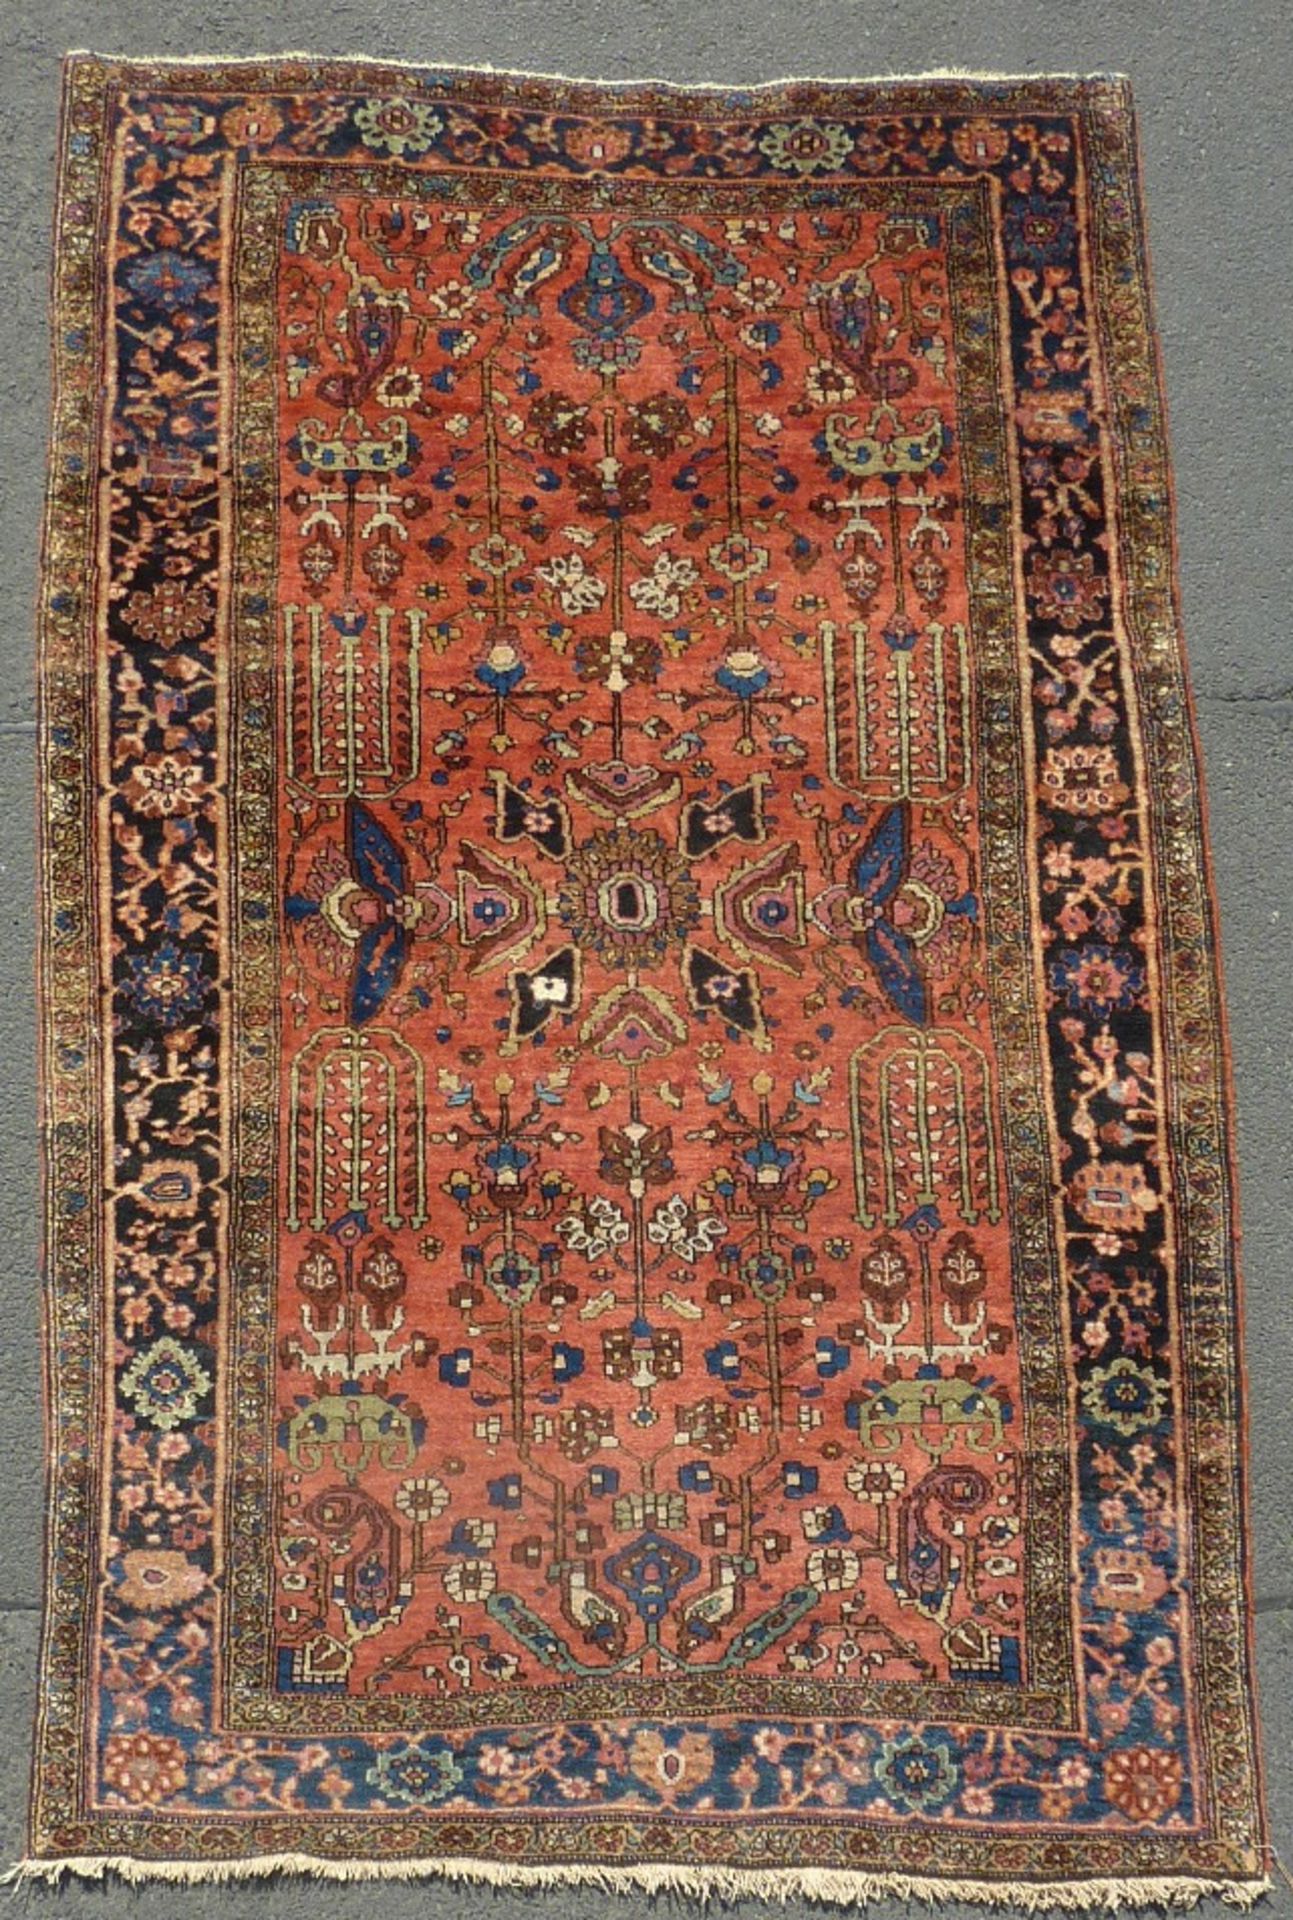 Saruk Persian rug. "US Sarugh". Iran. Old, around 1920.198 cm x 121 cm. Knotted by hand. Wool on